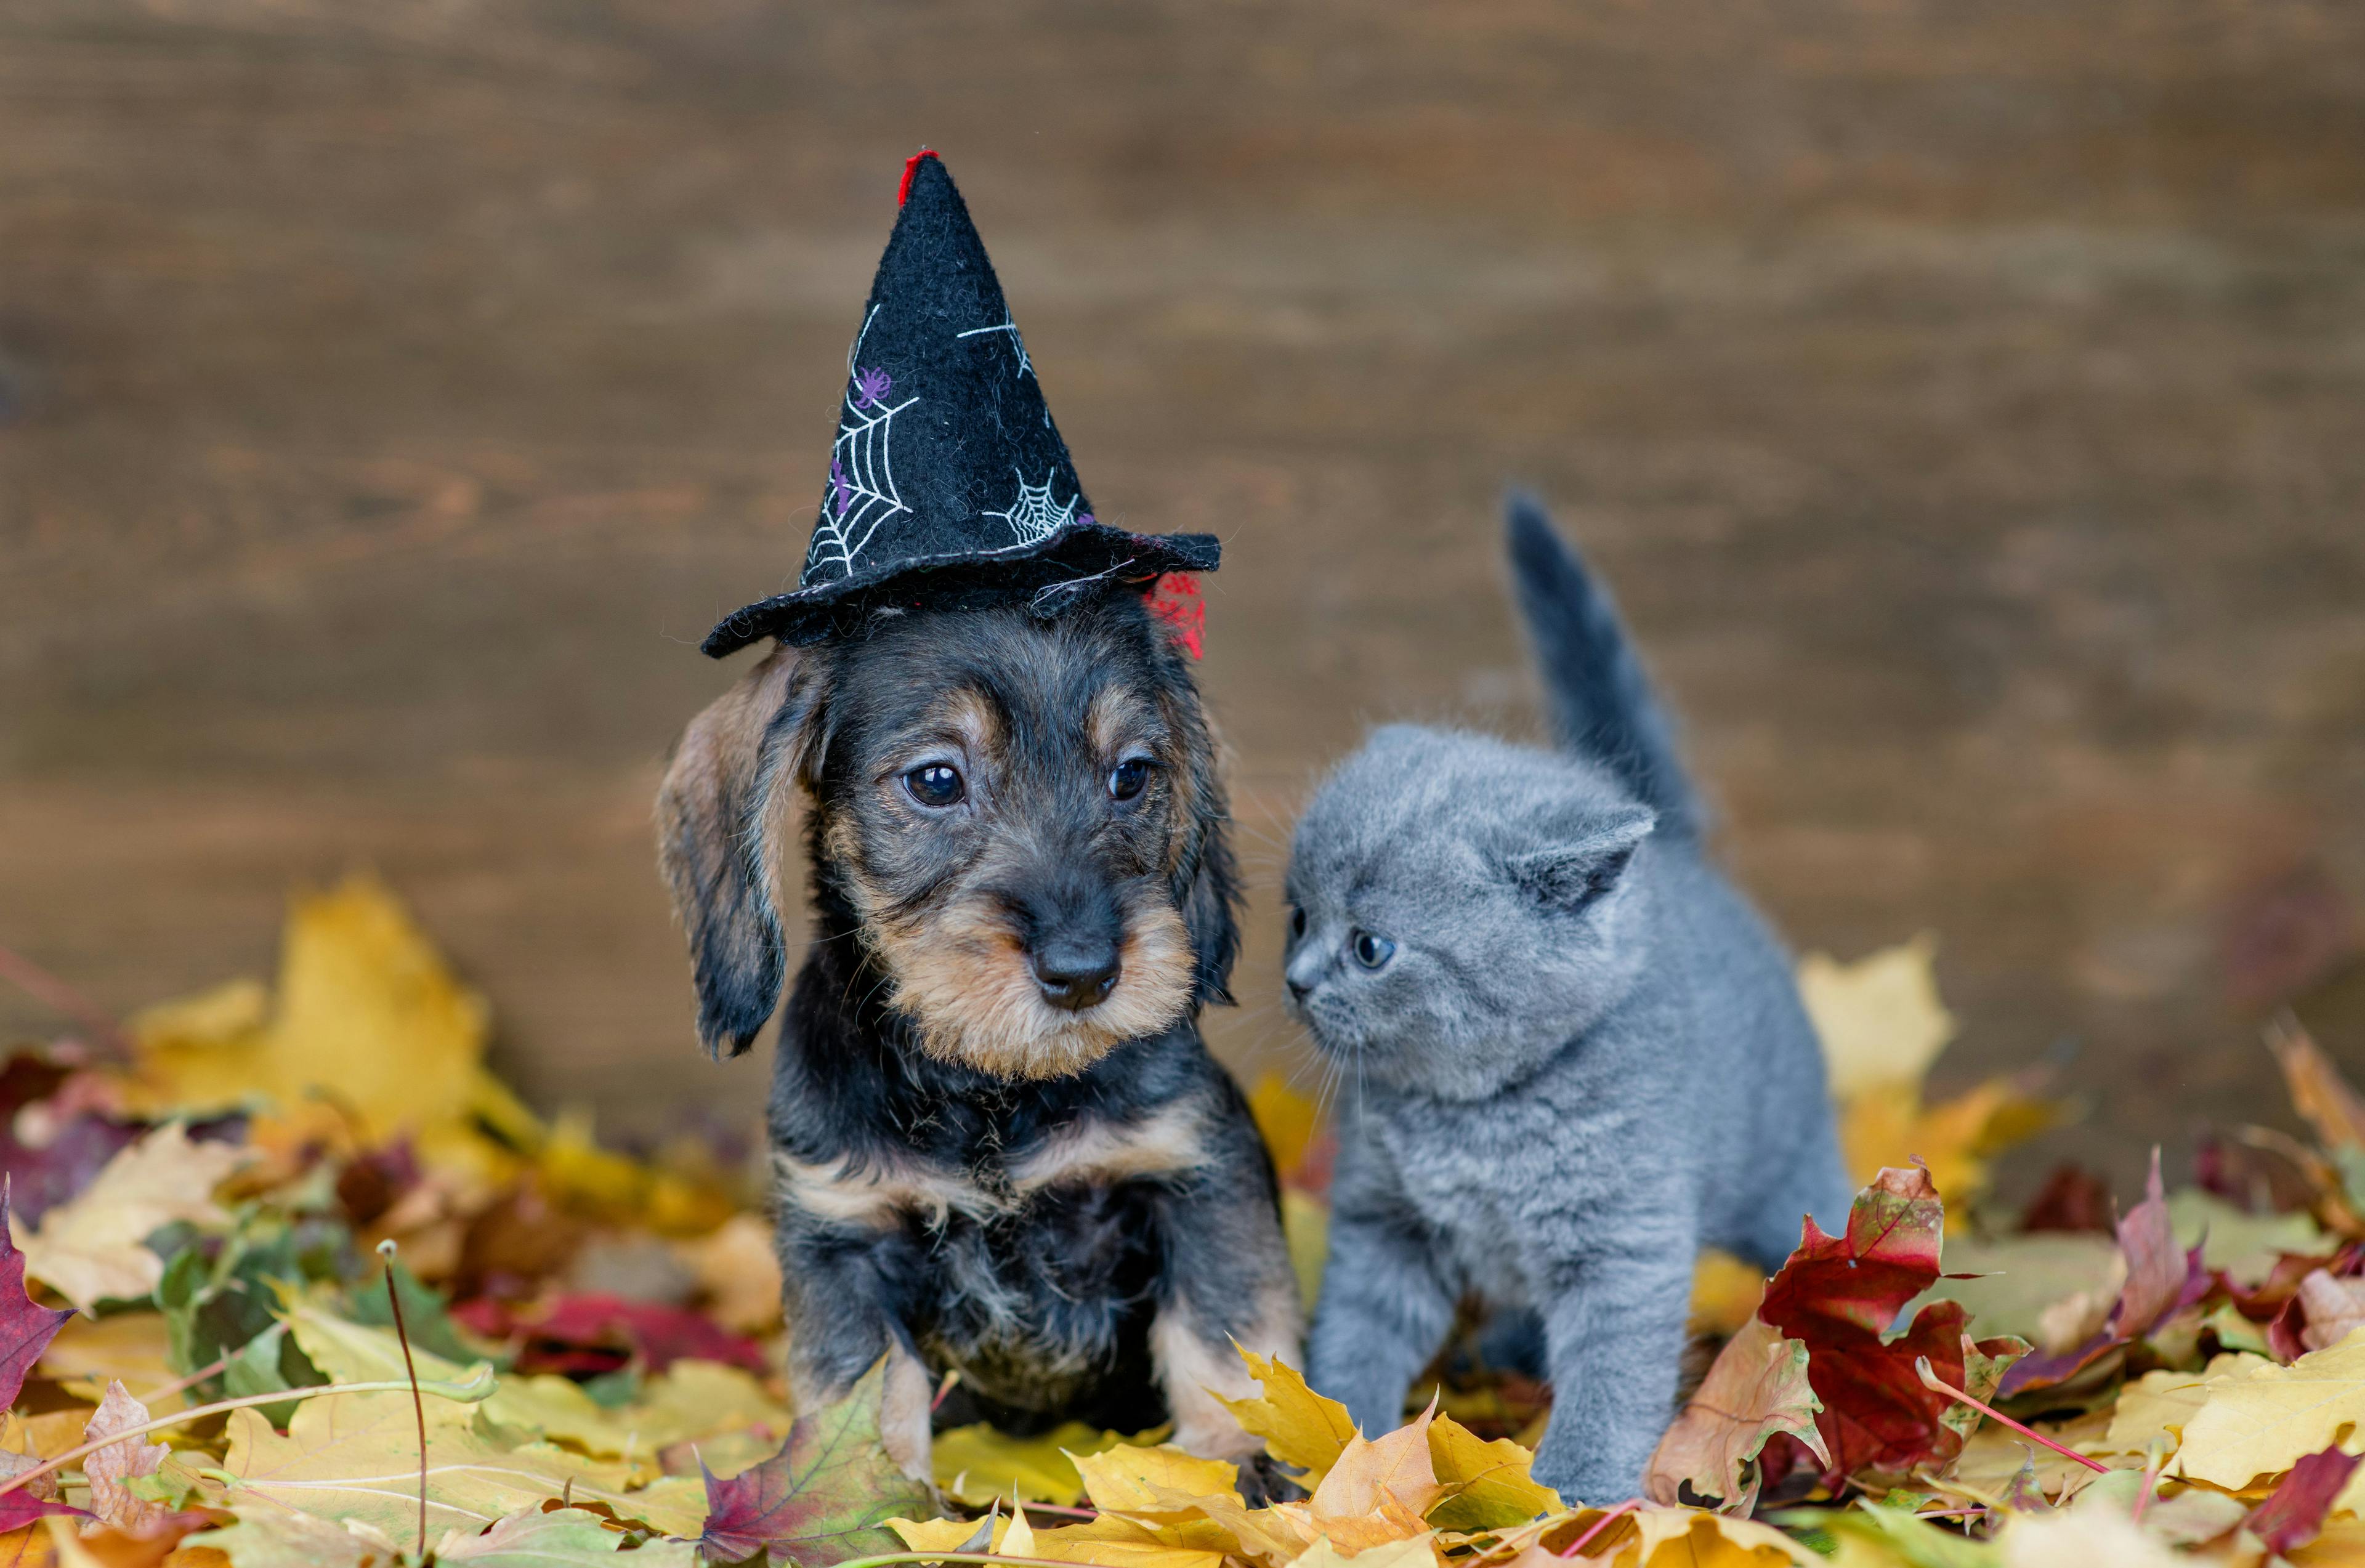 Halloween pet safety tips: Keep the “spooky” in spooky season just for humans 